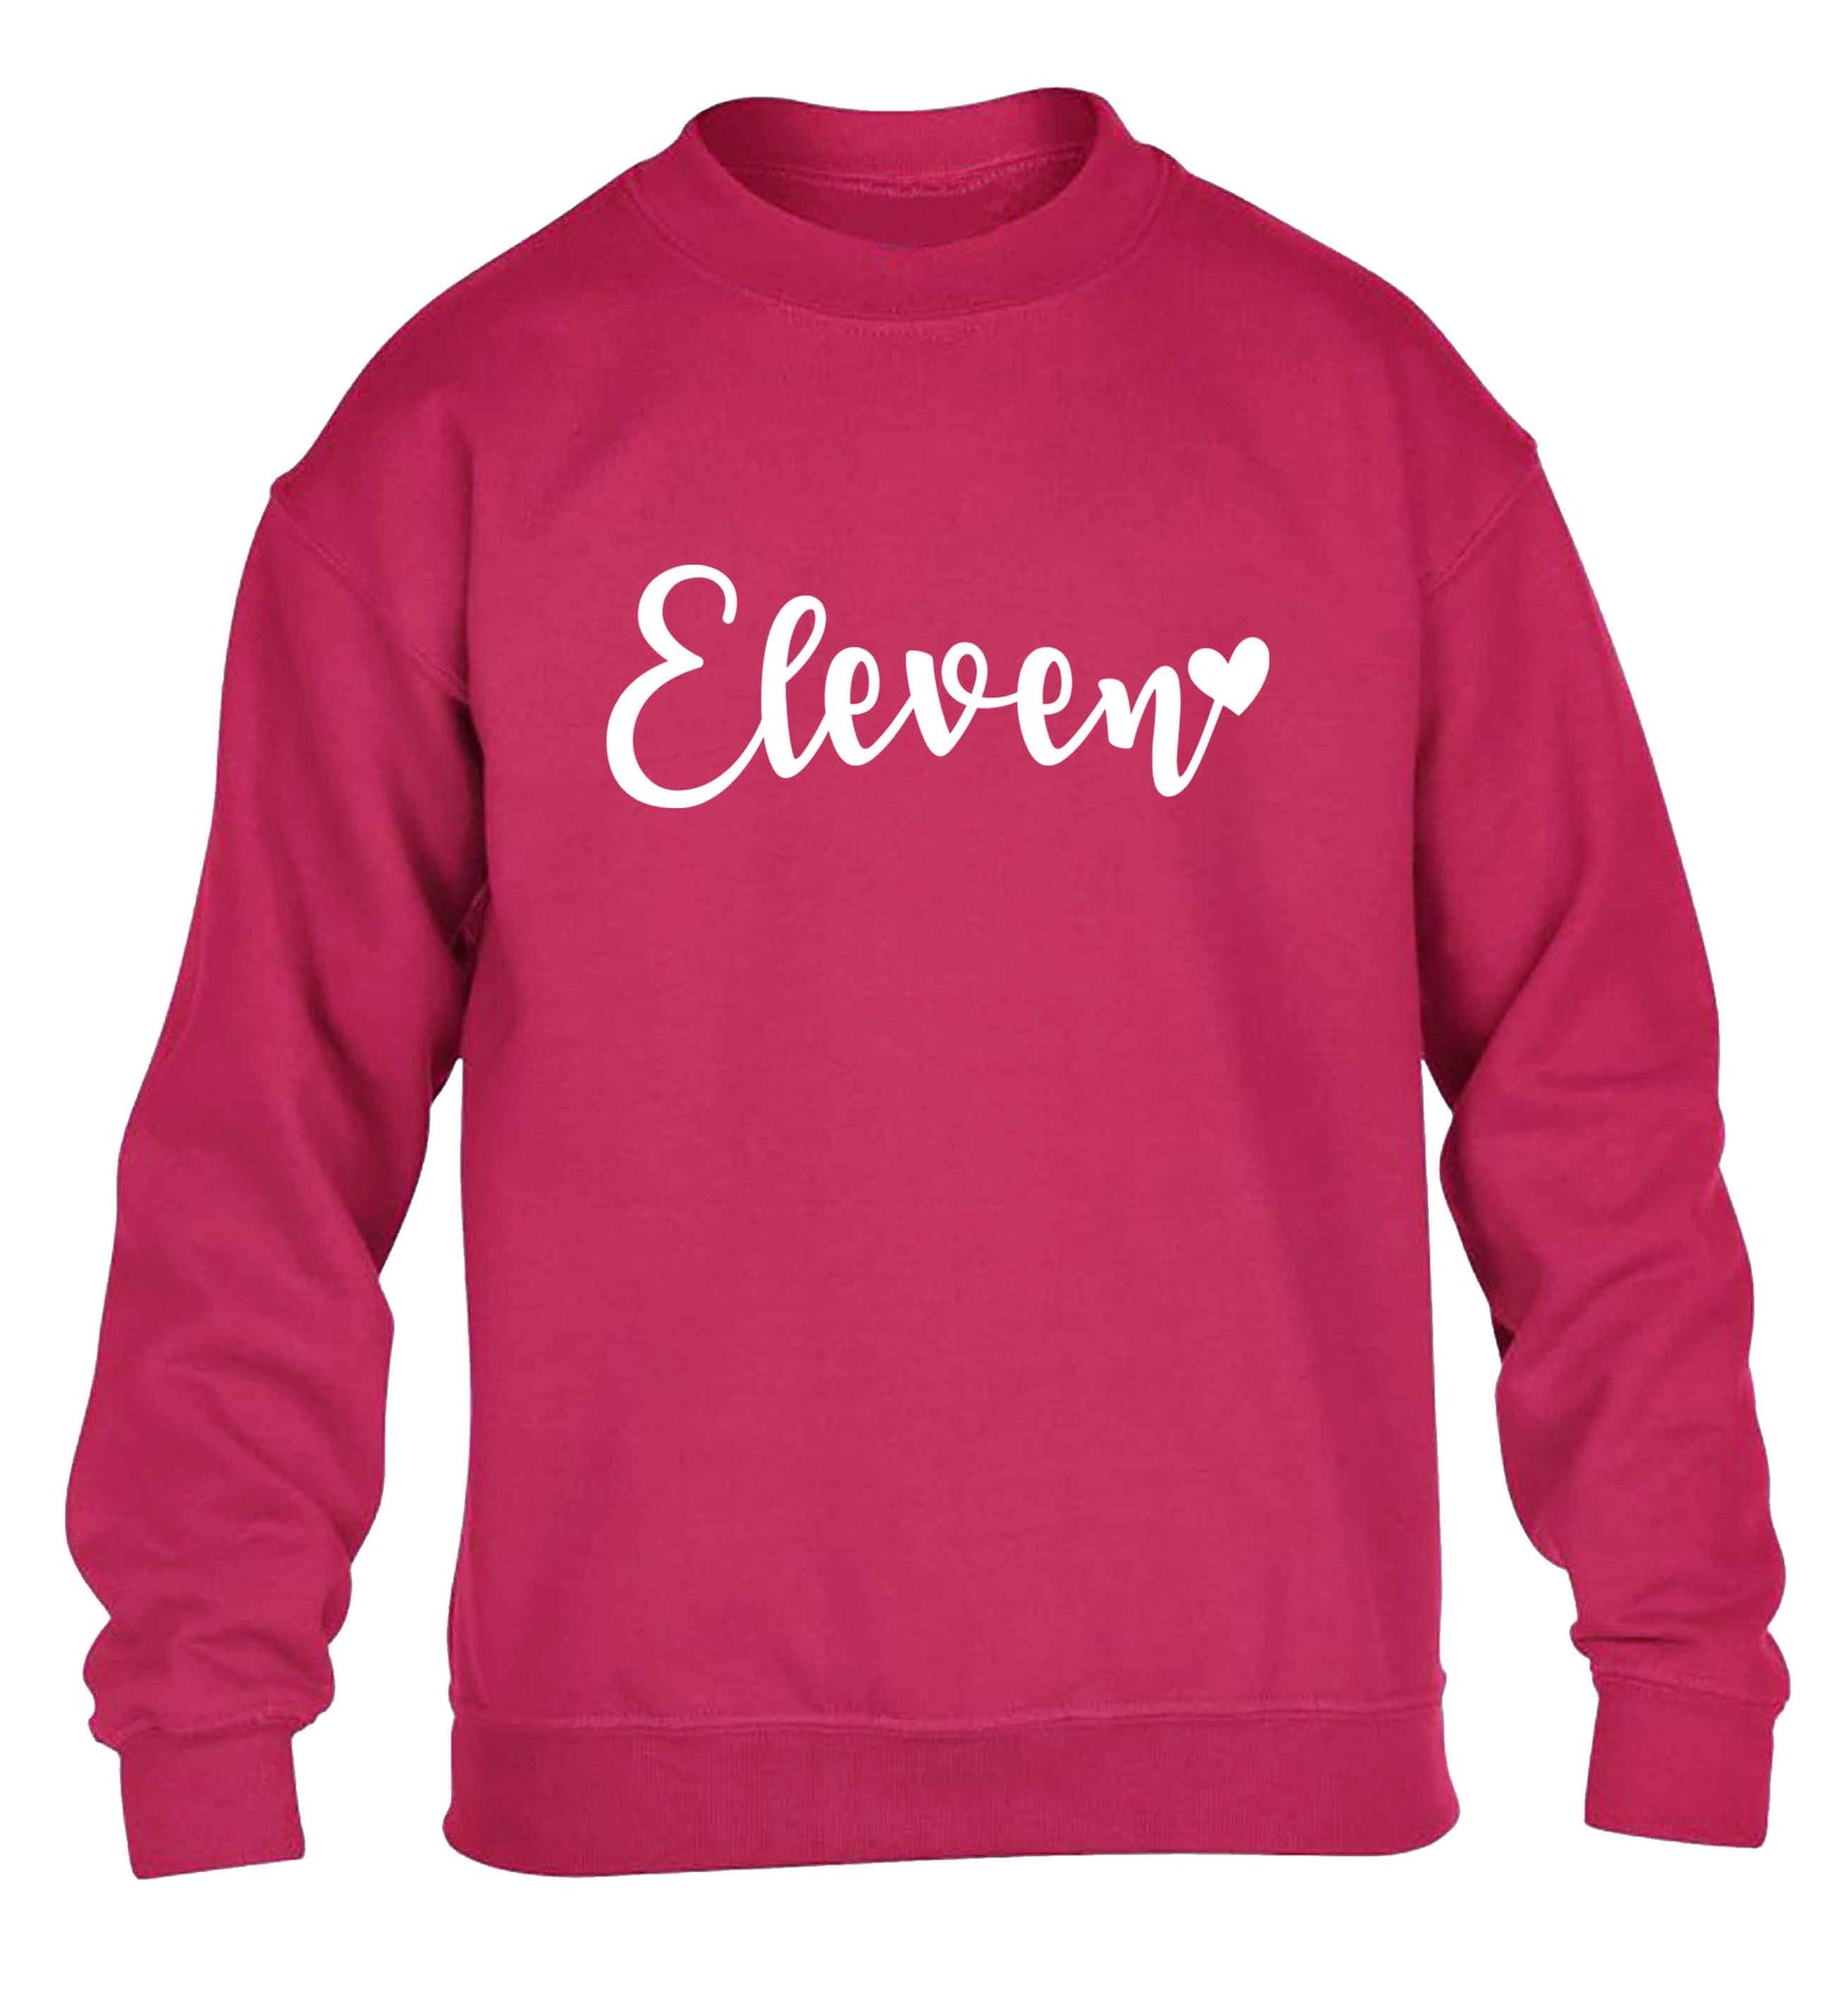 Eleven and heart! children's pink sweater 12-13 Years